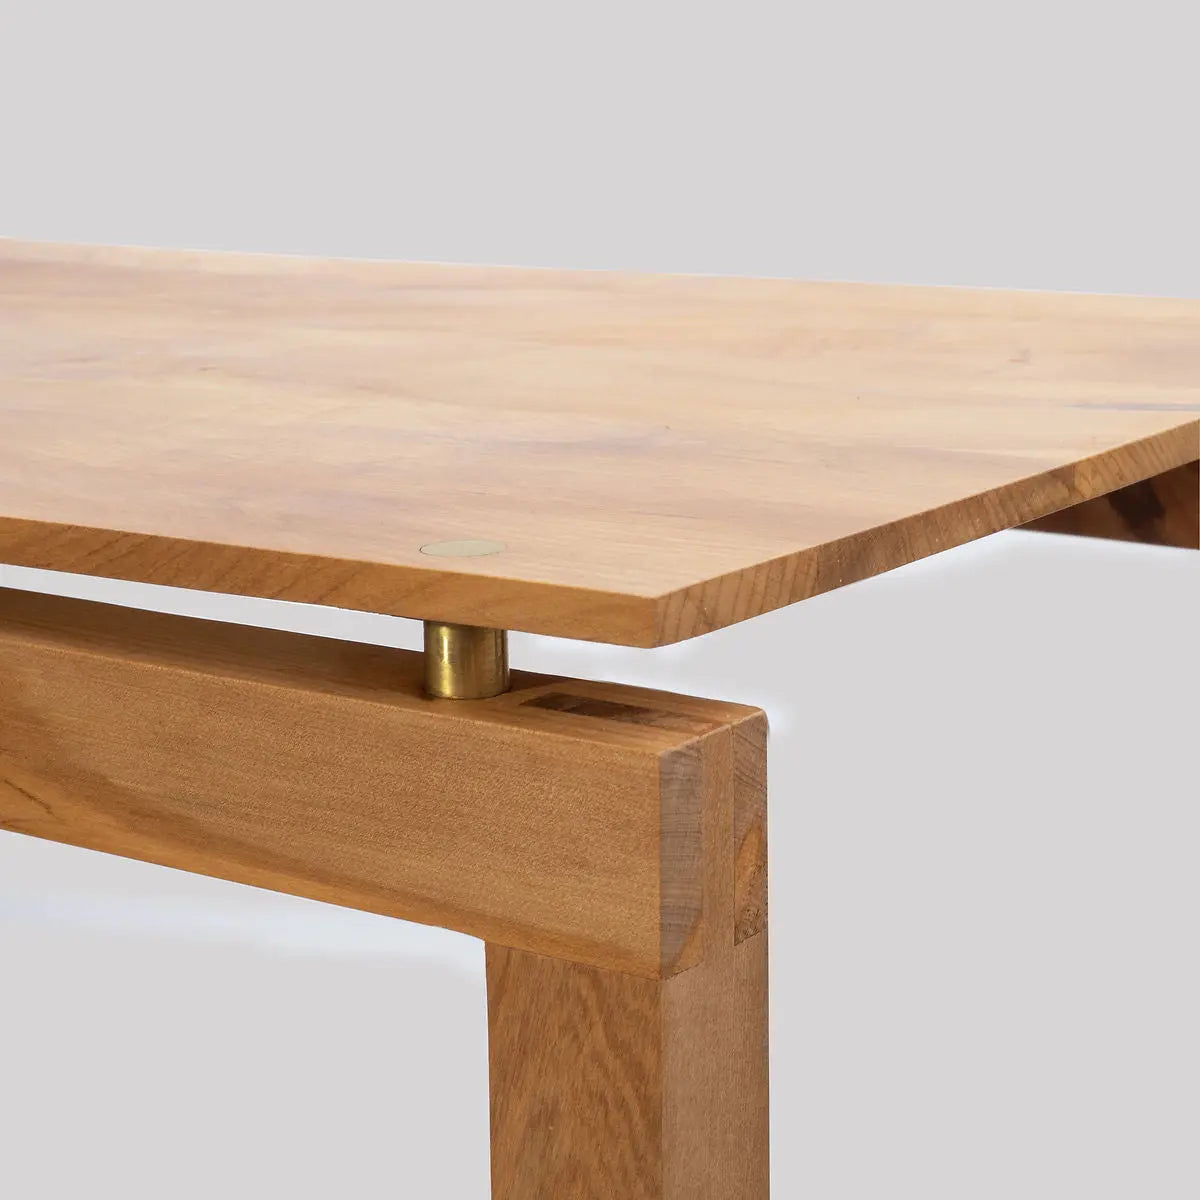 Wanaka Nest of tables Mobilier Ethique